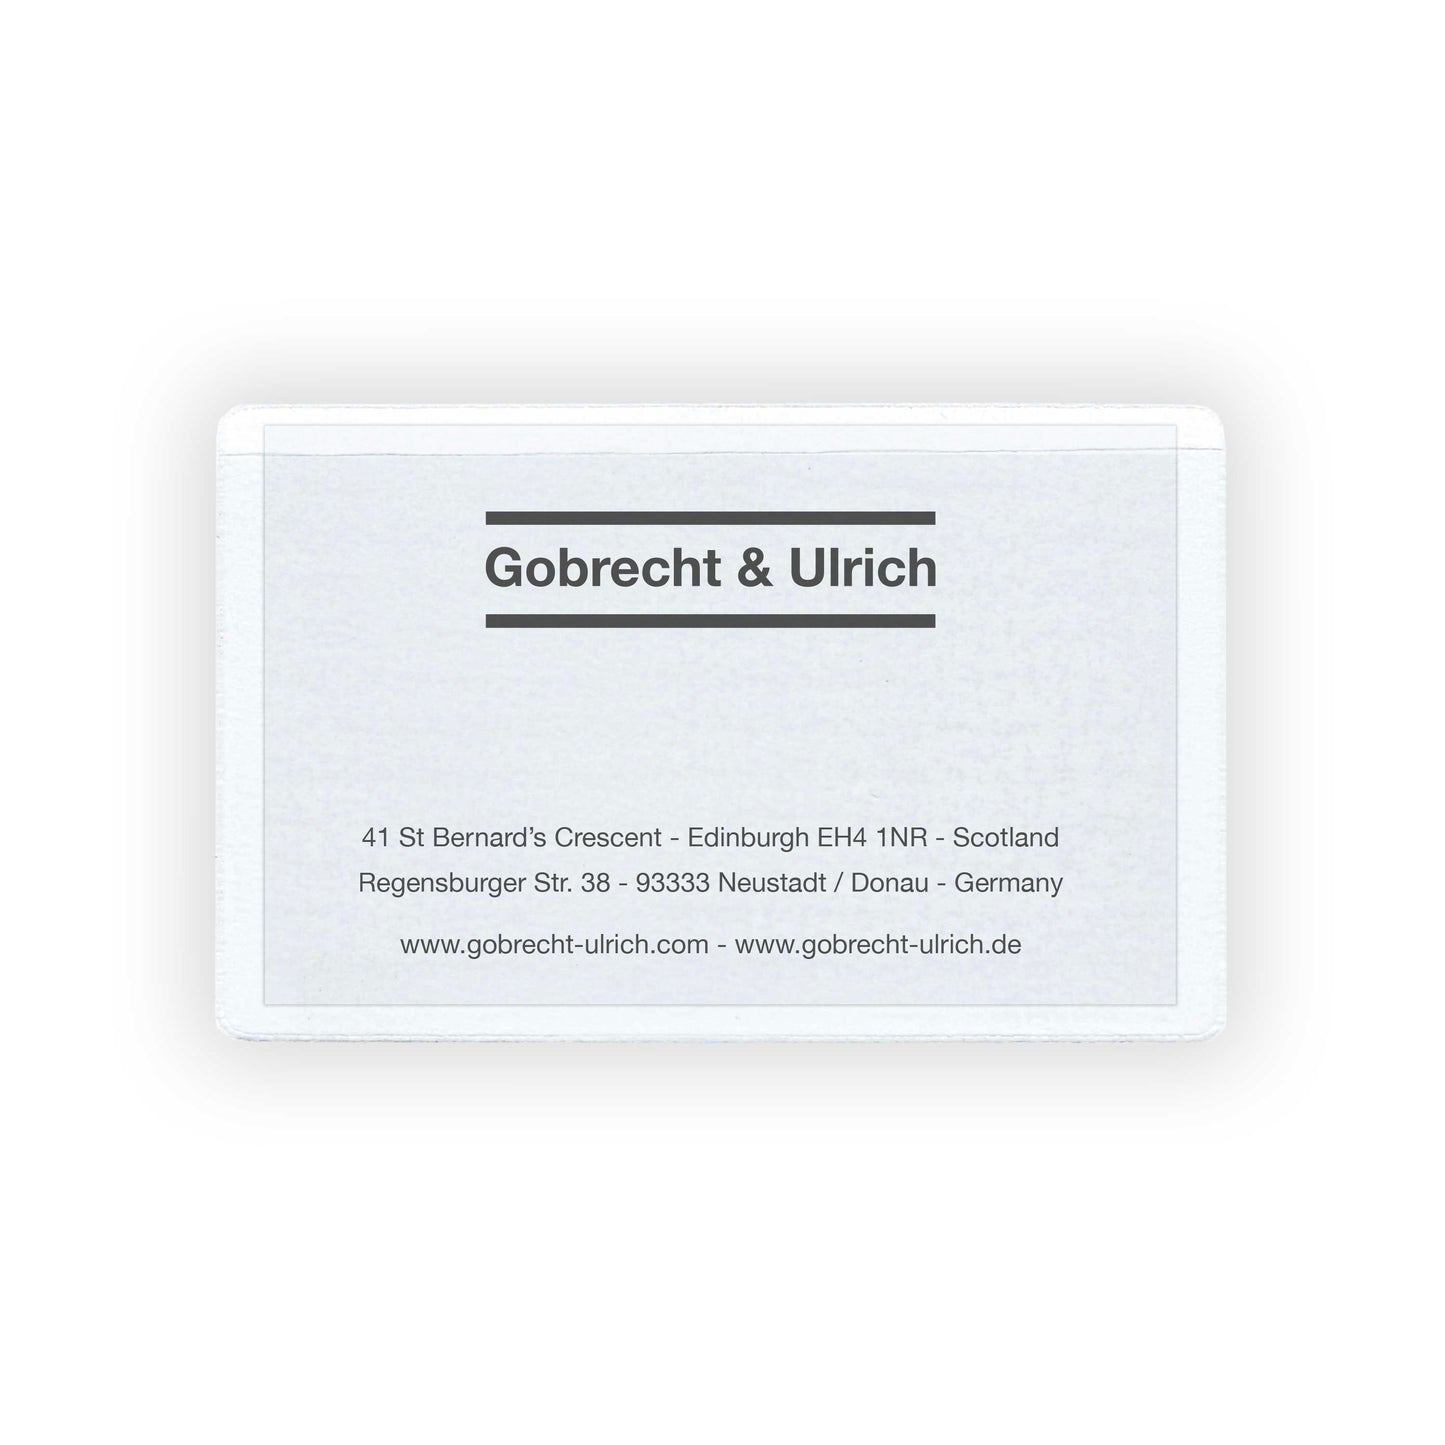 Self-adhesive Business Card Pocket with Business Card by Gobrecht & Ulrich